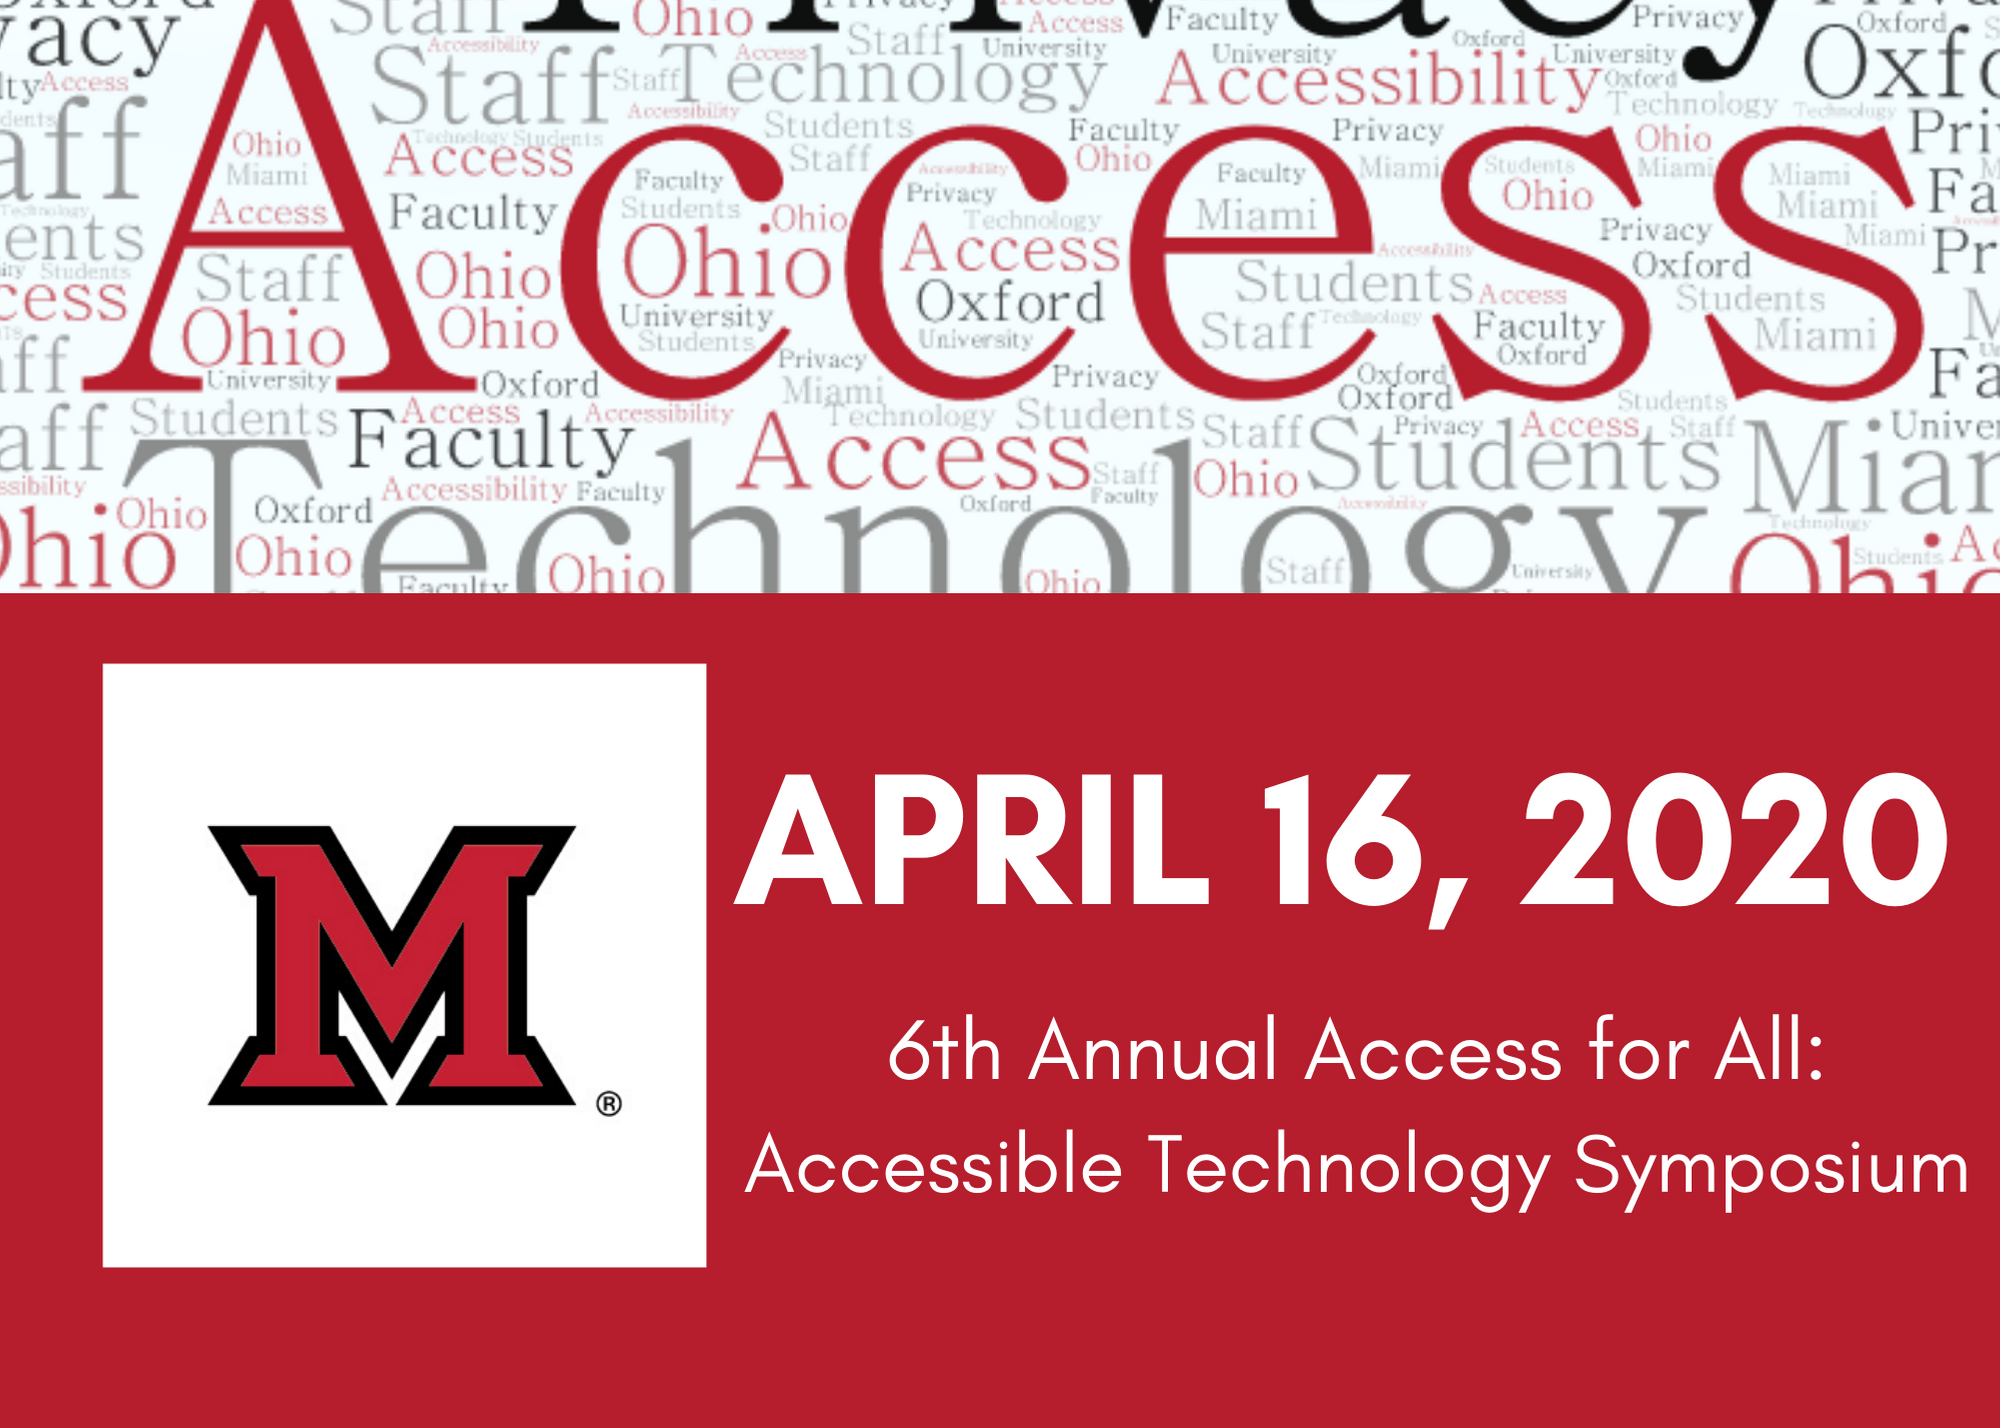 Access April 16, 2020 6th Annual Access for All Accessible Technology Symposium